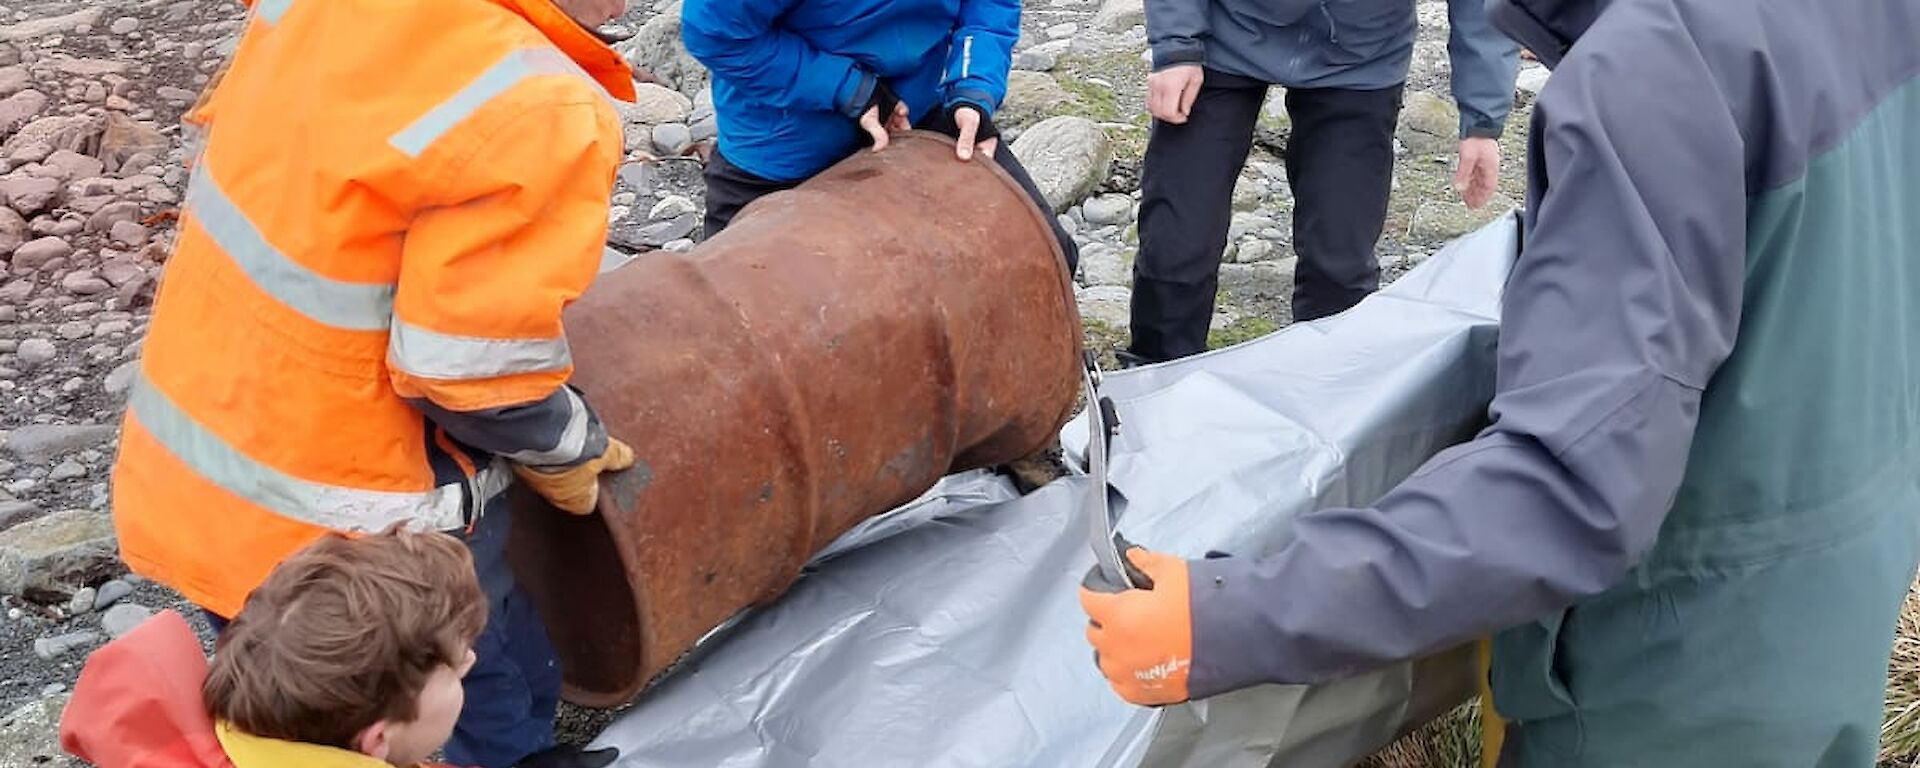 The fuel drum is loaded into the stretcher by keen members of the search and rescue team